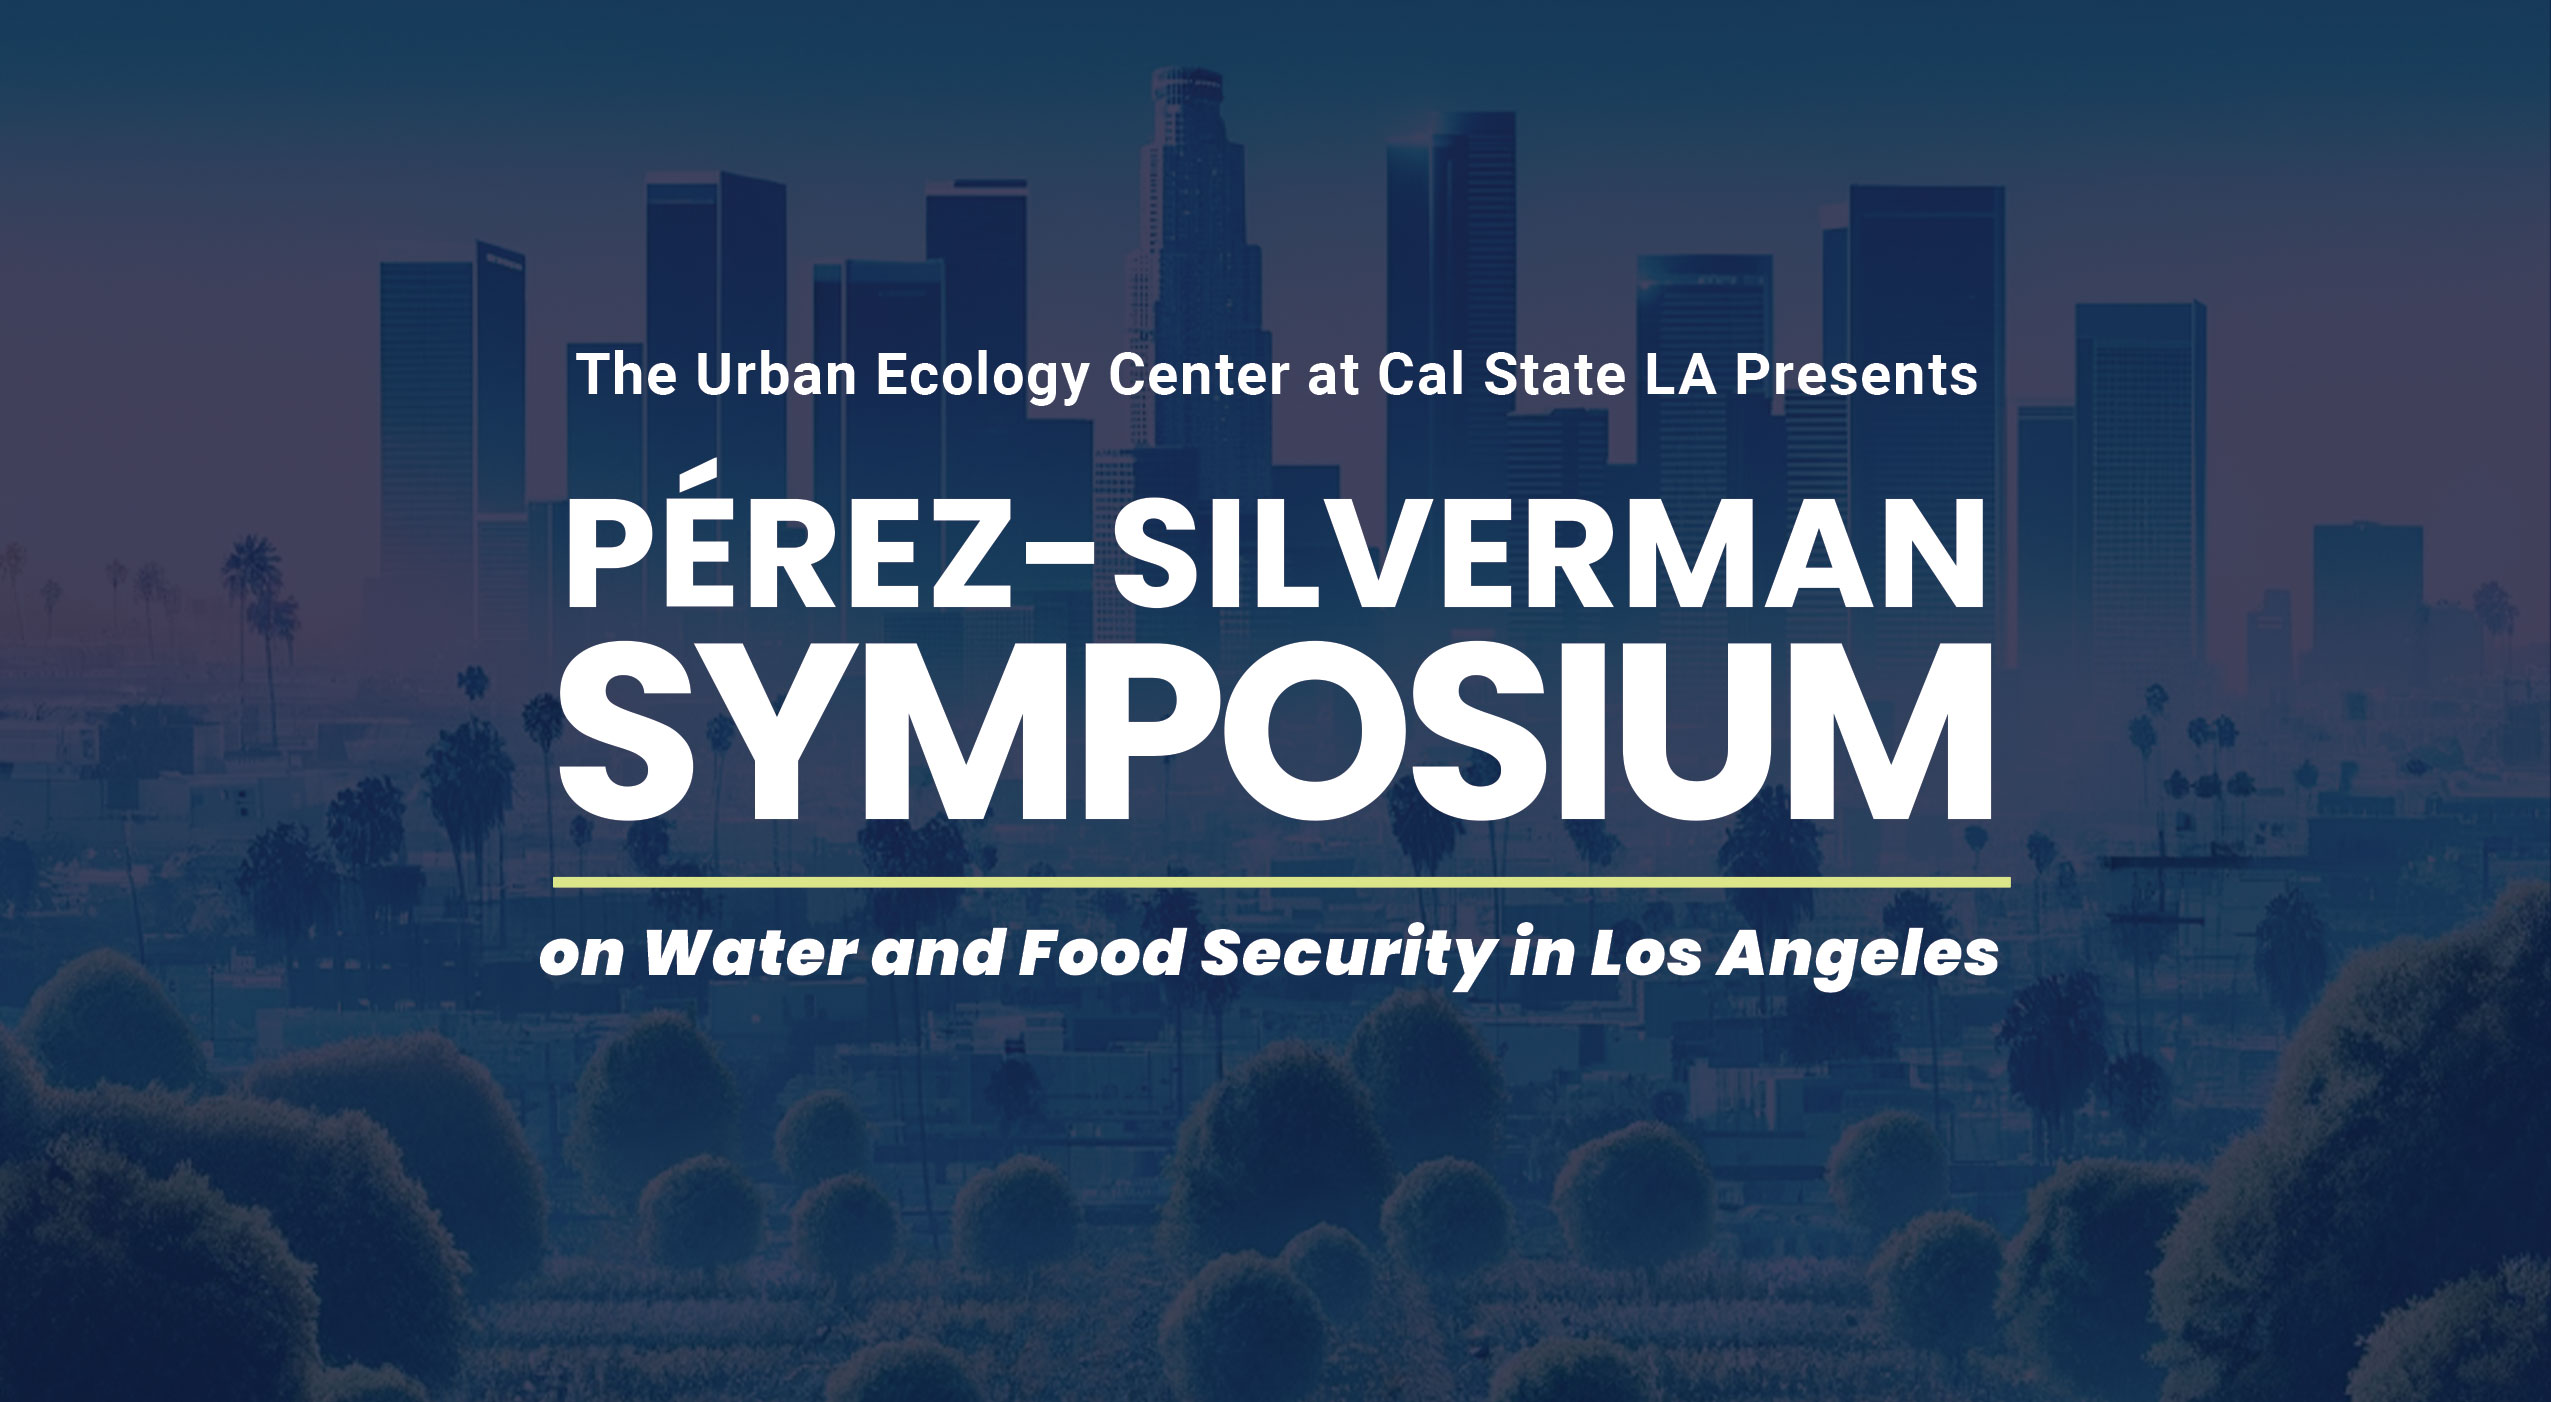 The Urban Ecology Center at Cal State LA Presents Pérez-Silverman Symposium on Water and Food Security in Los Angeles